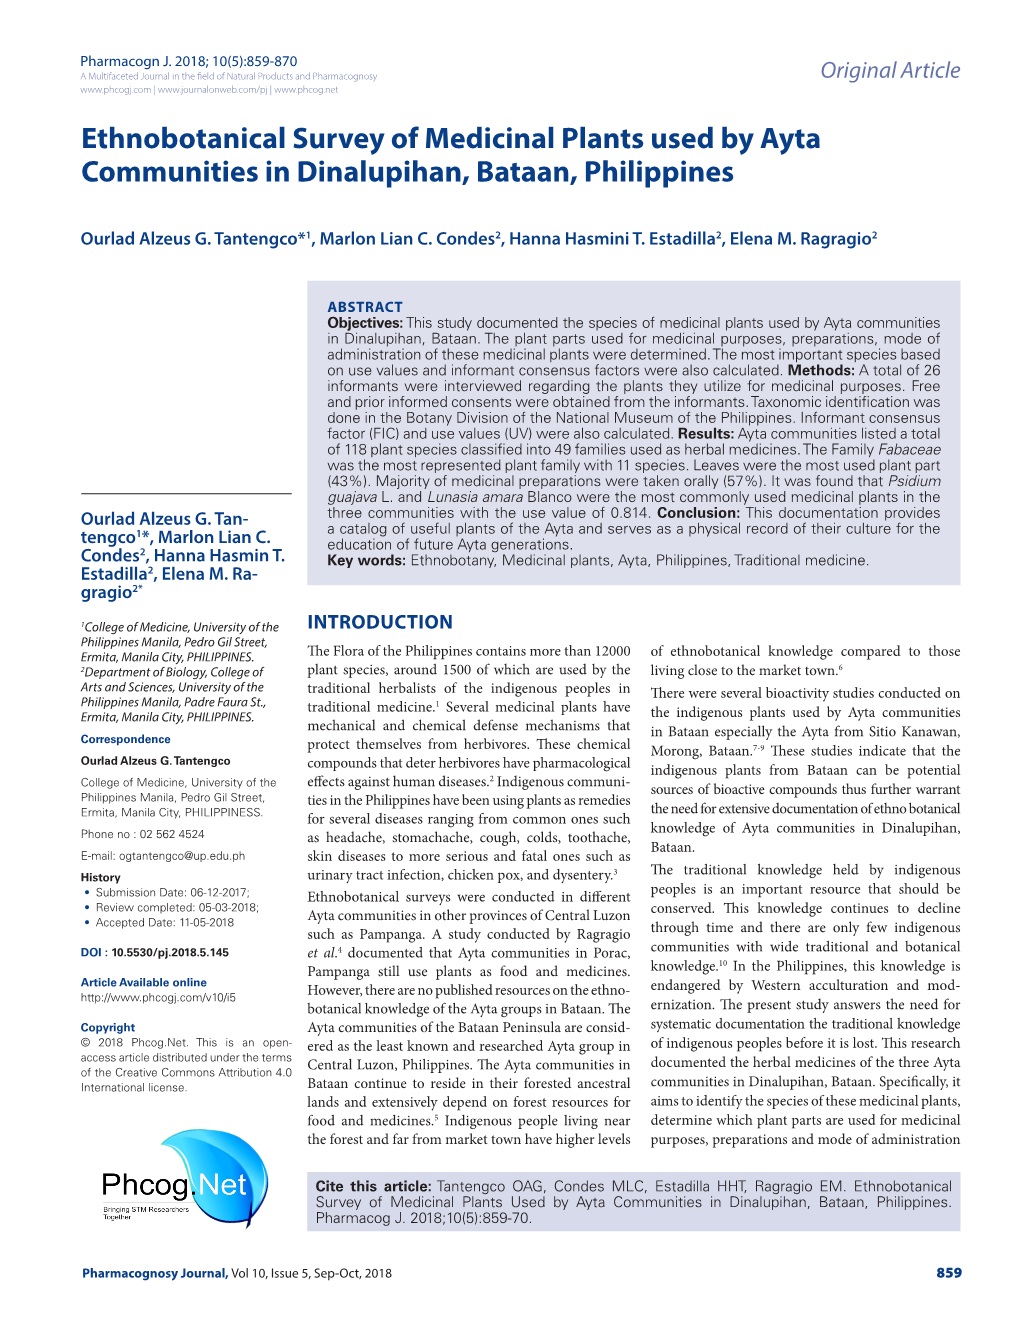 Ethnobotanical Survey of Medicinal Plants Used by Ayta Communities in Dinalupihan, Bataan, Philippines